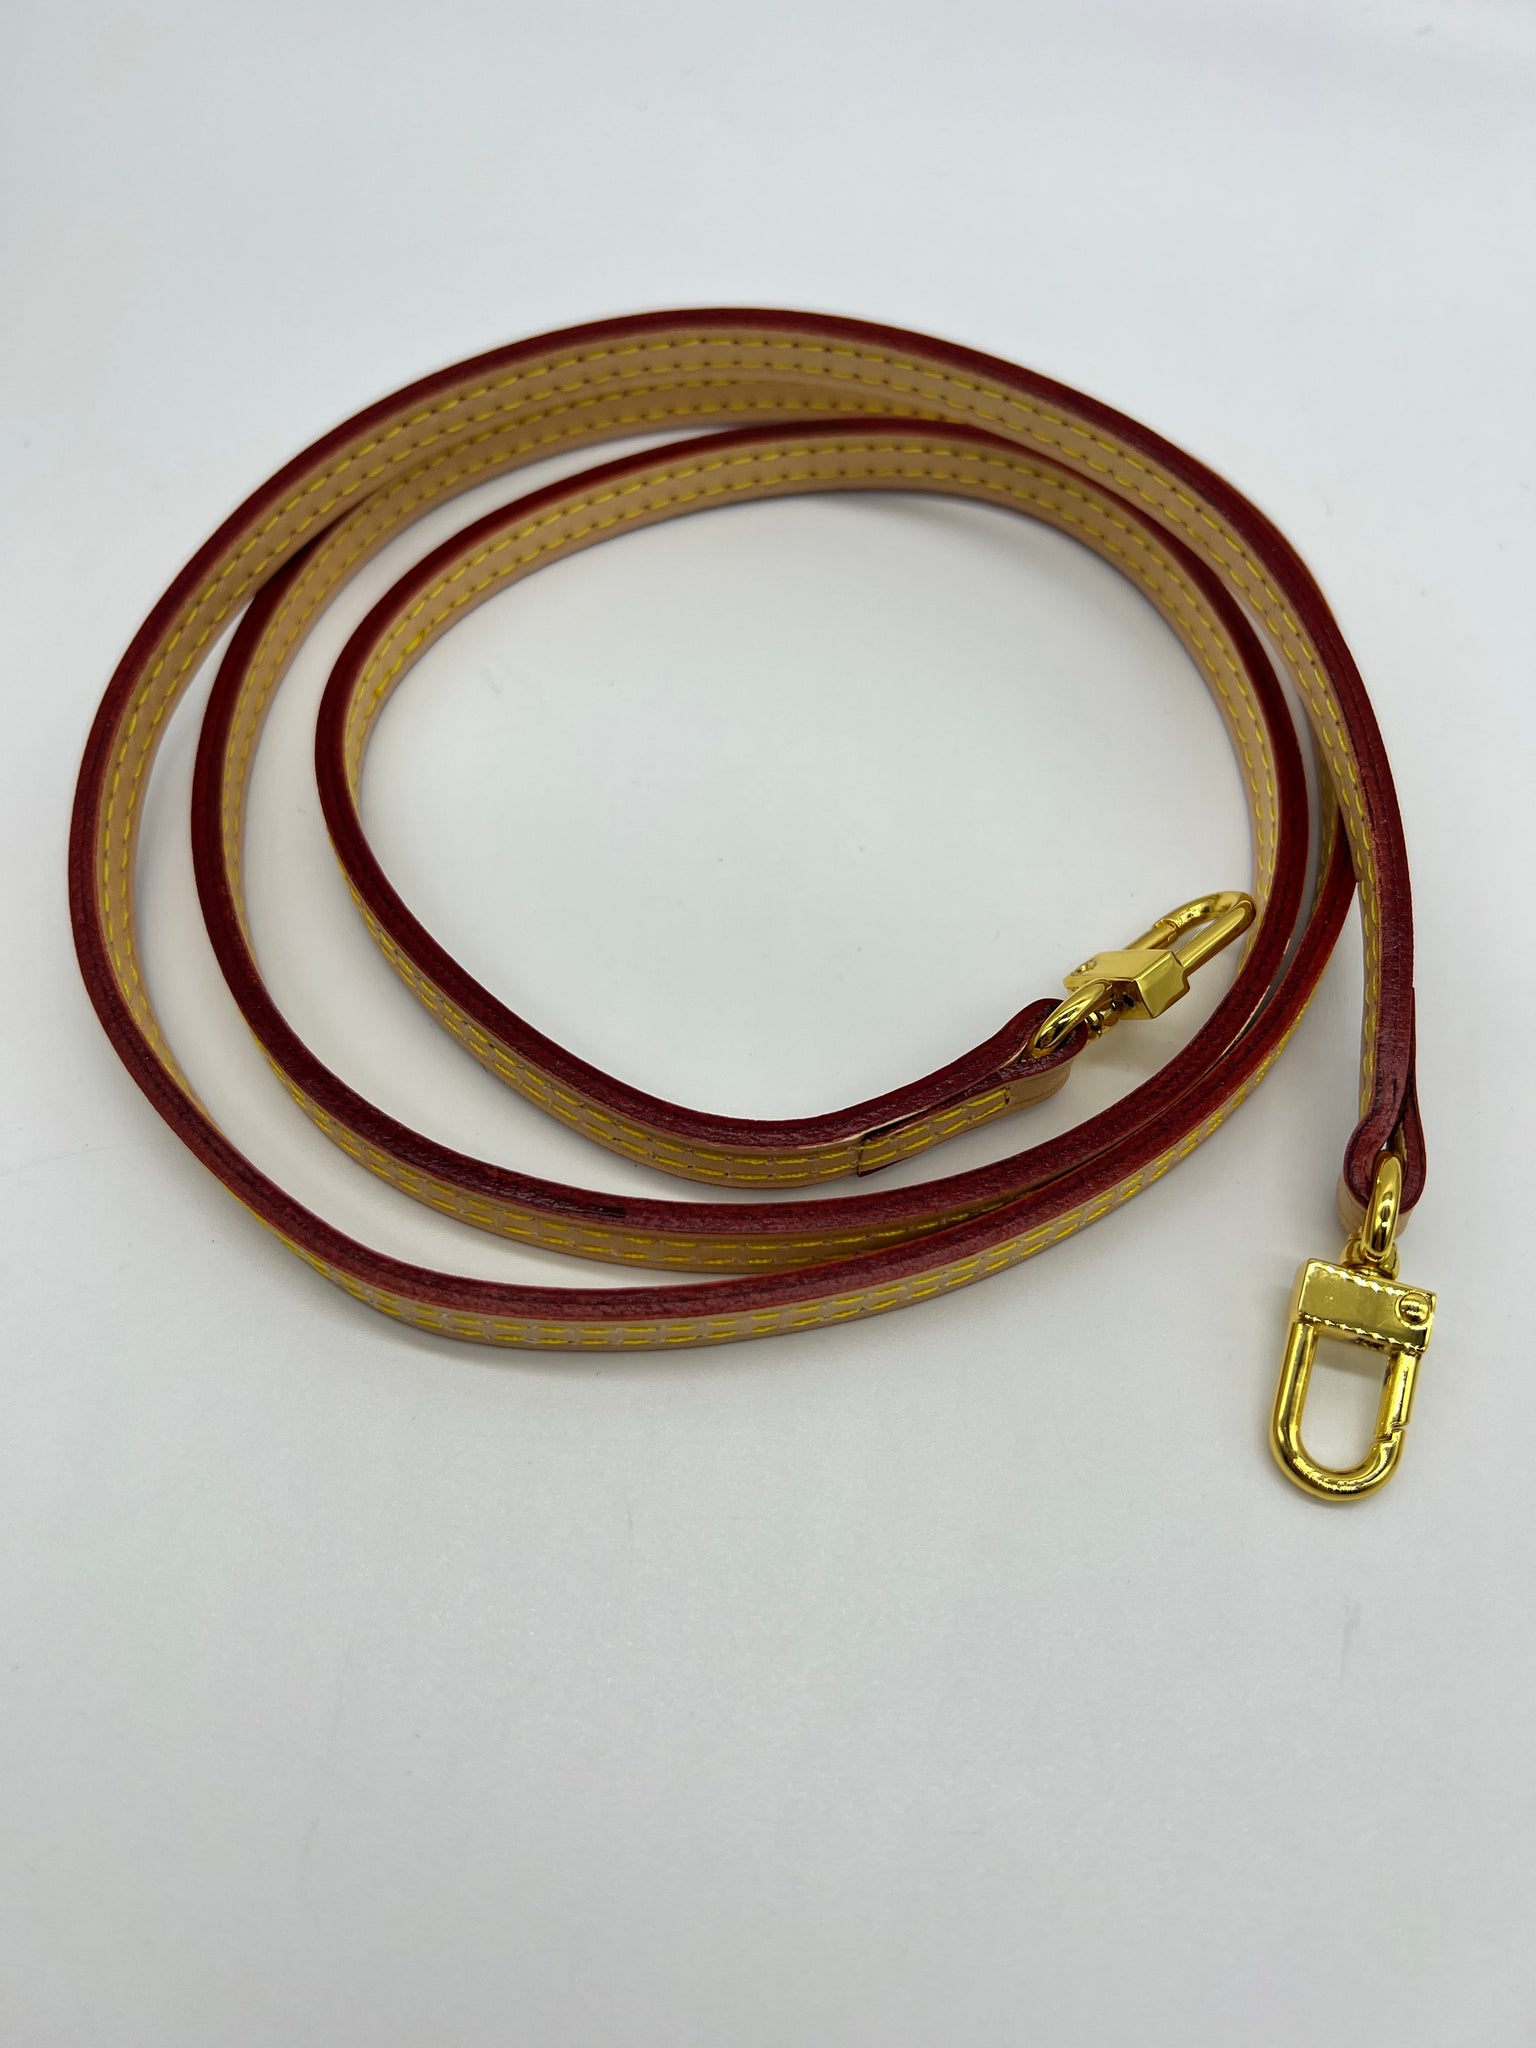 NEW Genuine Leather Purse Straps - WIDE 080523 – KimmieBBags LLC